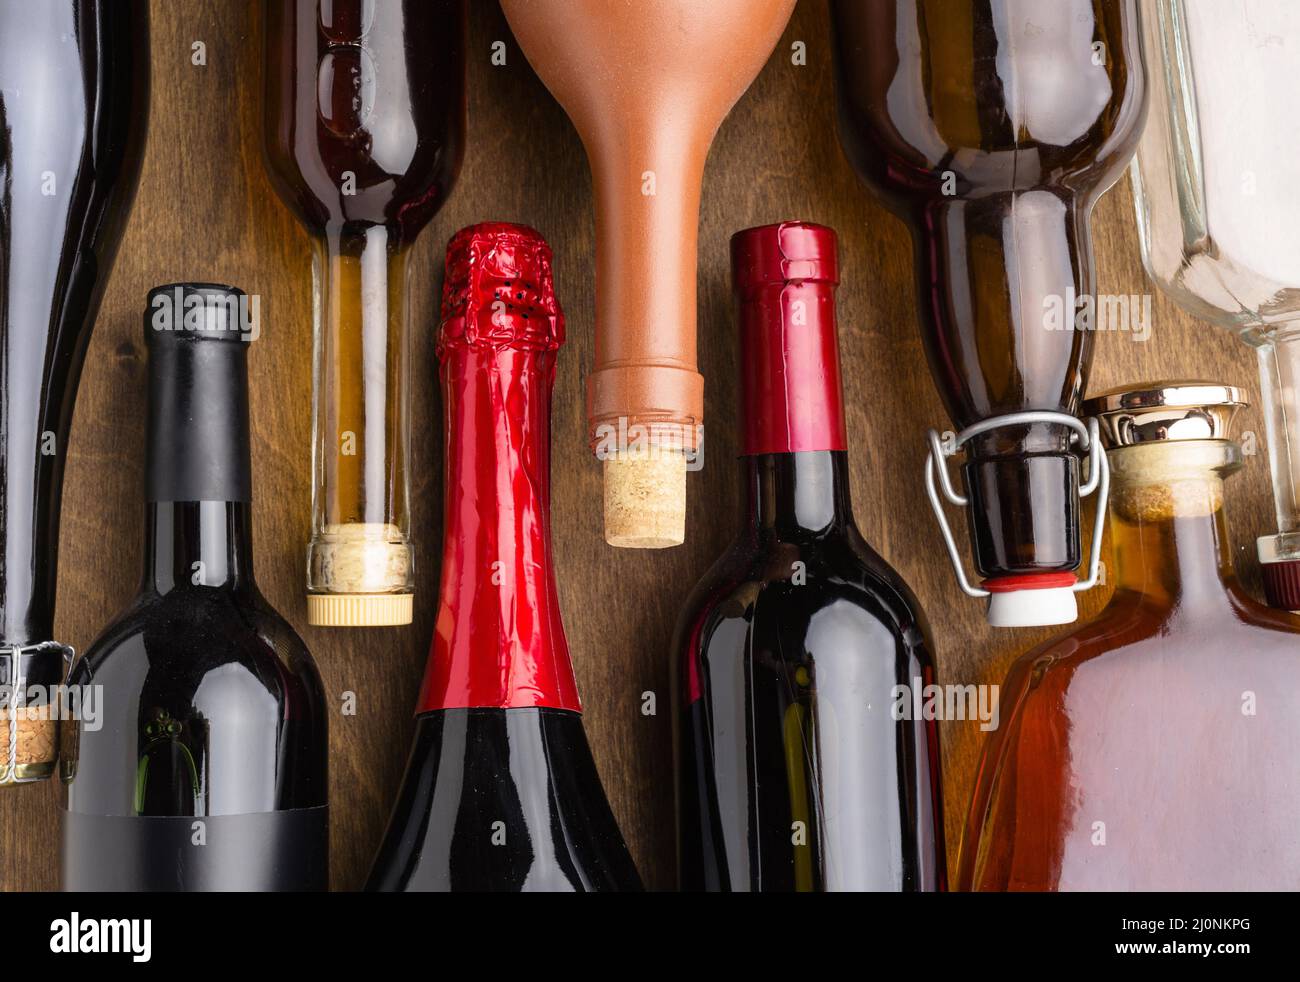 Top view bottles alcohol assortment. High quality and resolution beautiful photo concept Stock Photo